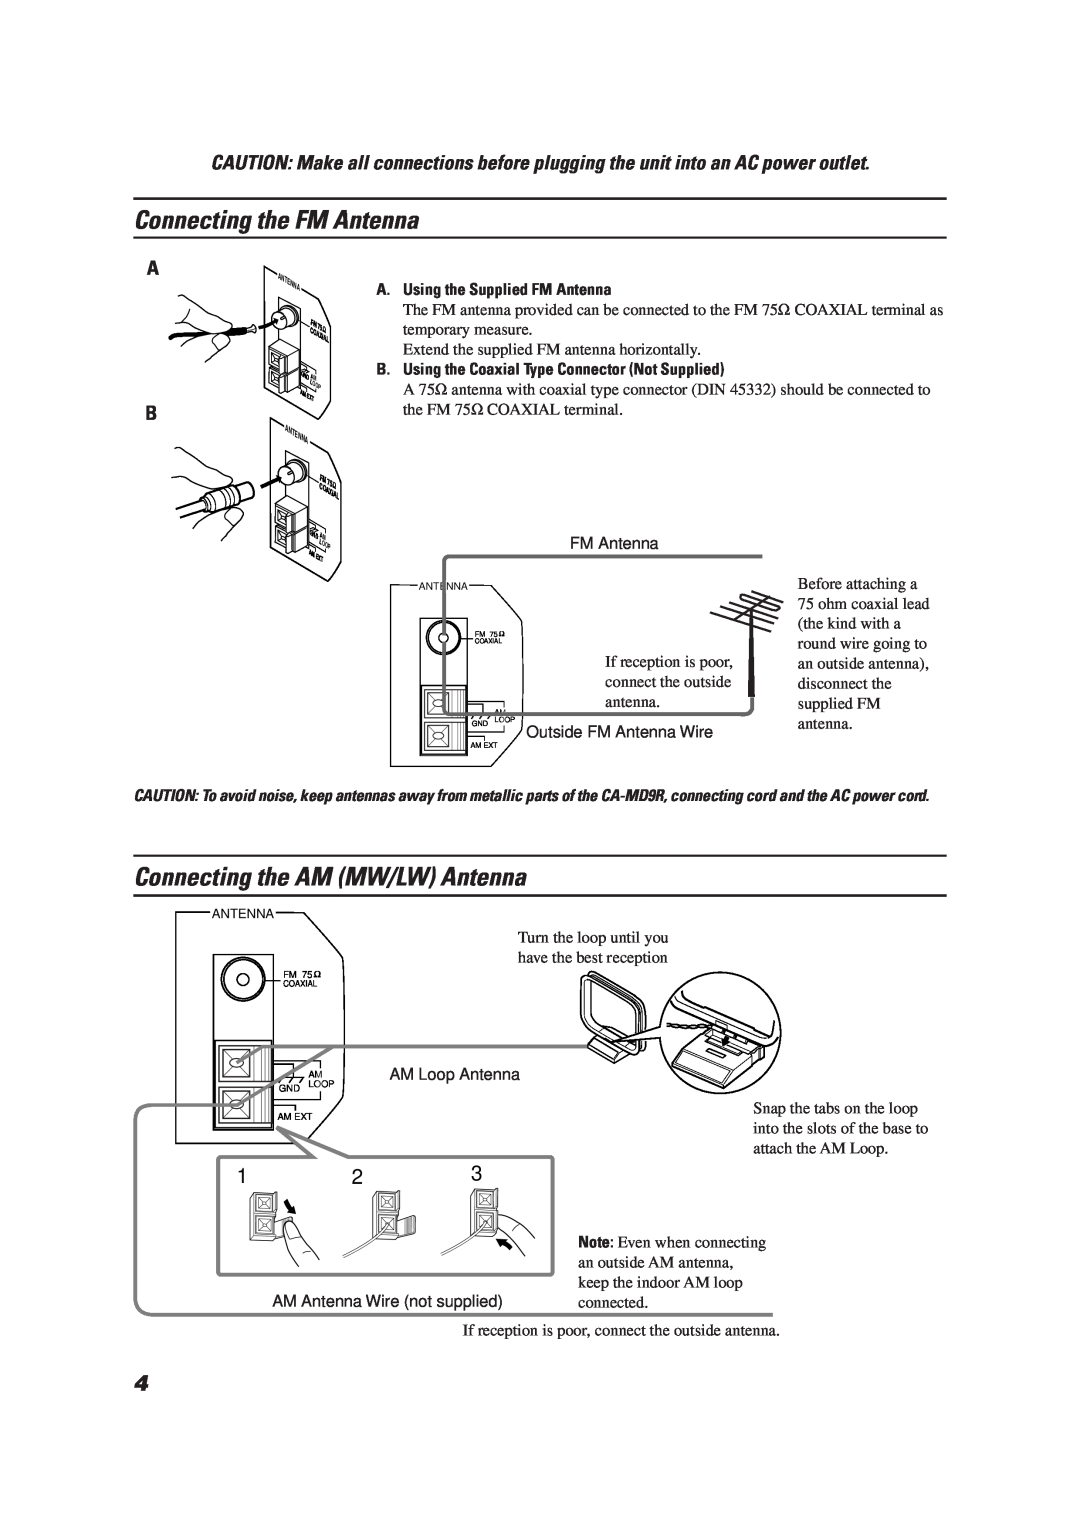 JVC LET0070-002A manual Connecting the FM Antenna, Connecting the AM MW/LW Antenna, A.Using the Supplied FM Antenna 